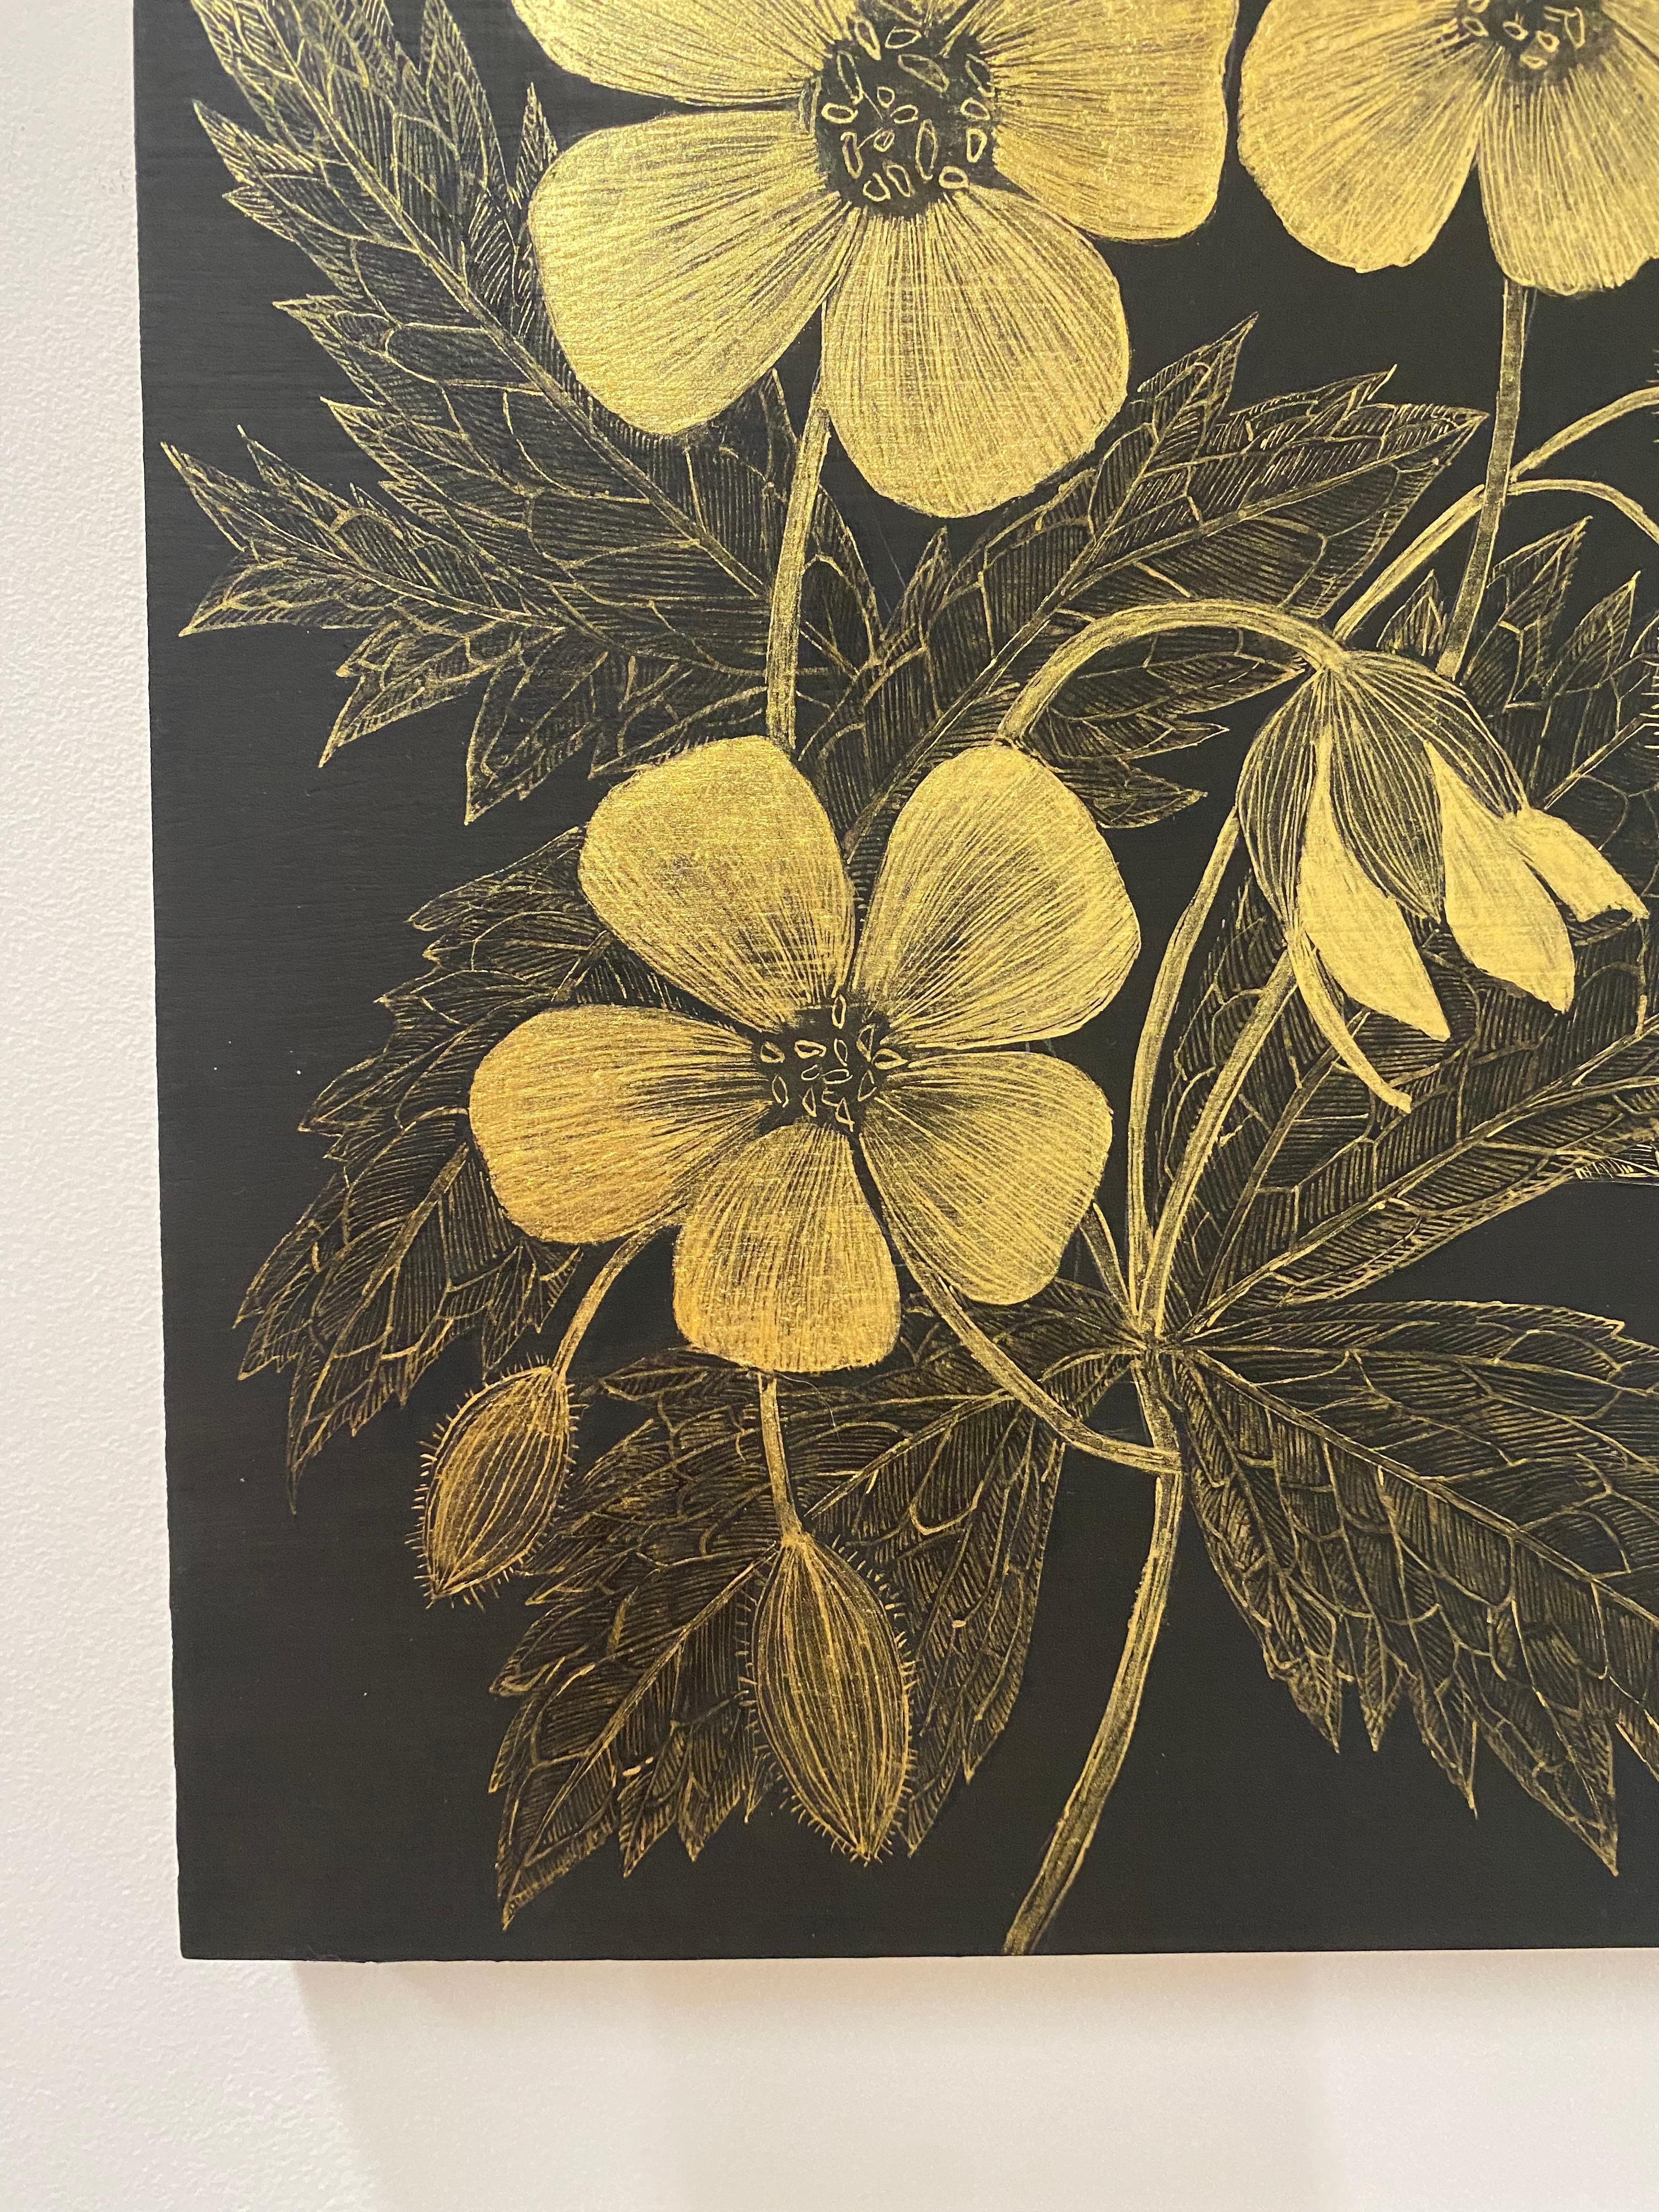 Wild Geranium Two, Botanical Painting Black Panel, Gold Flowers, Leaves, Stem For Sale 3